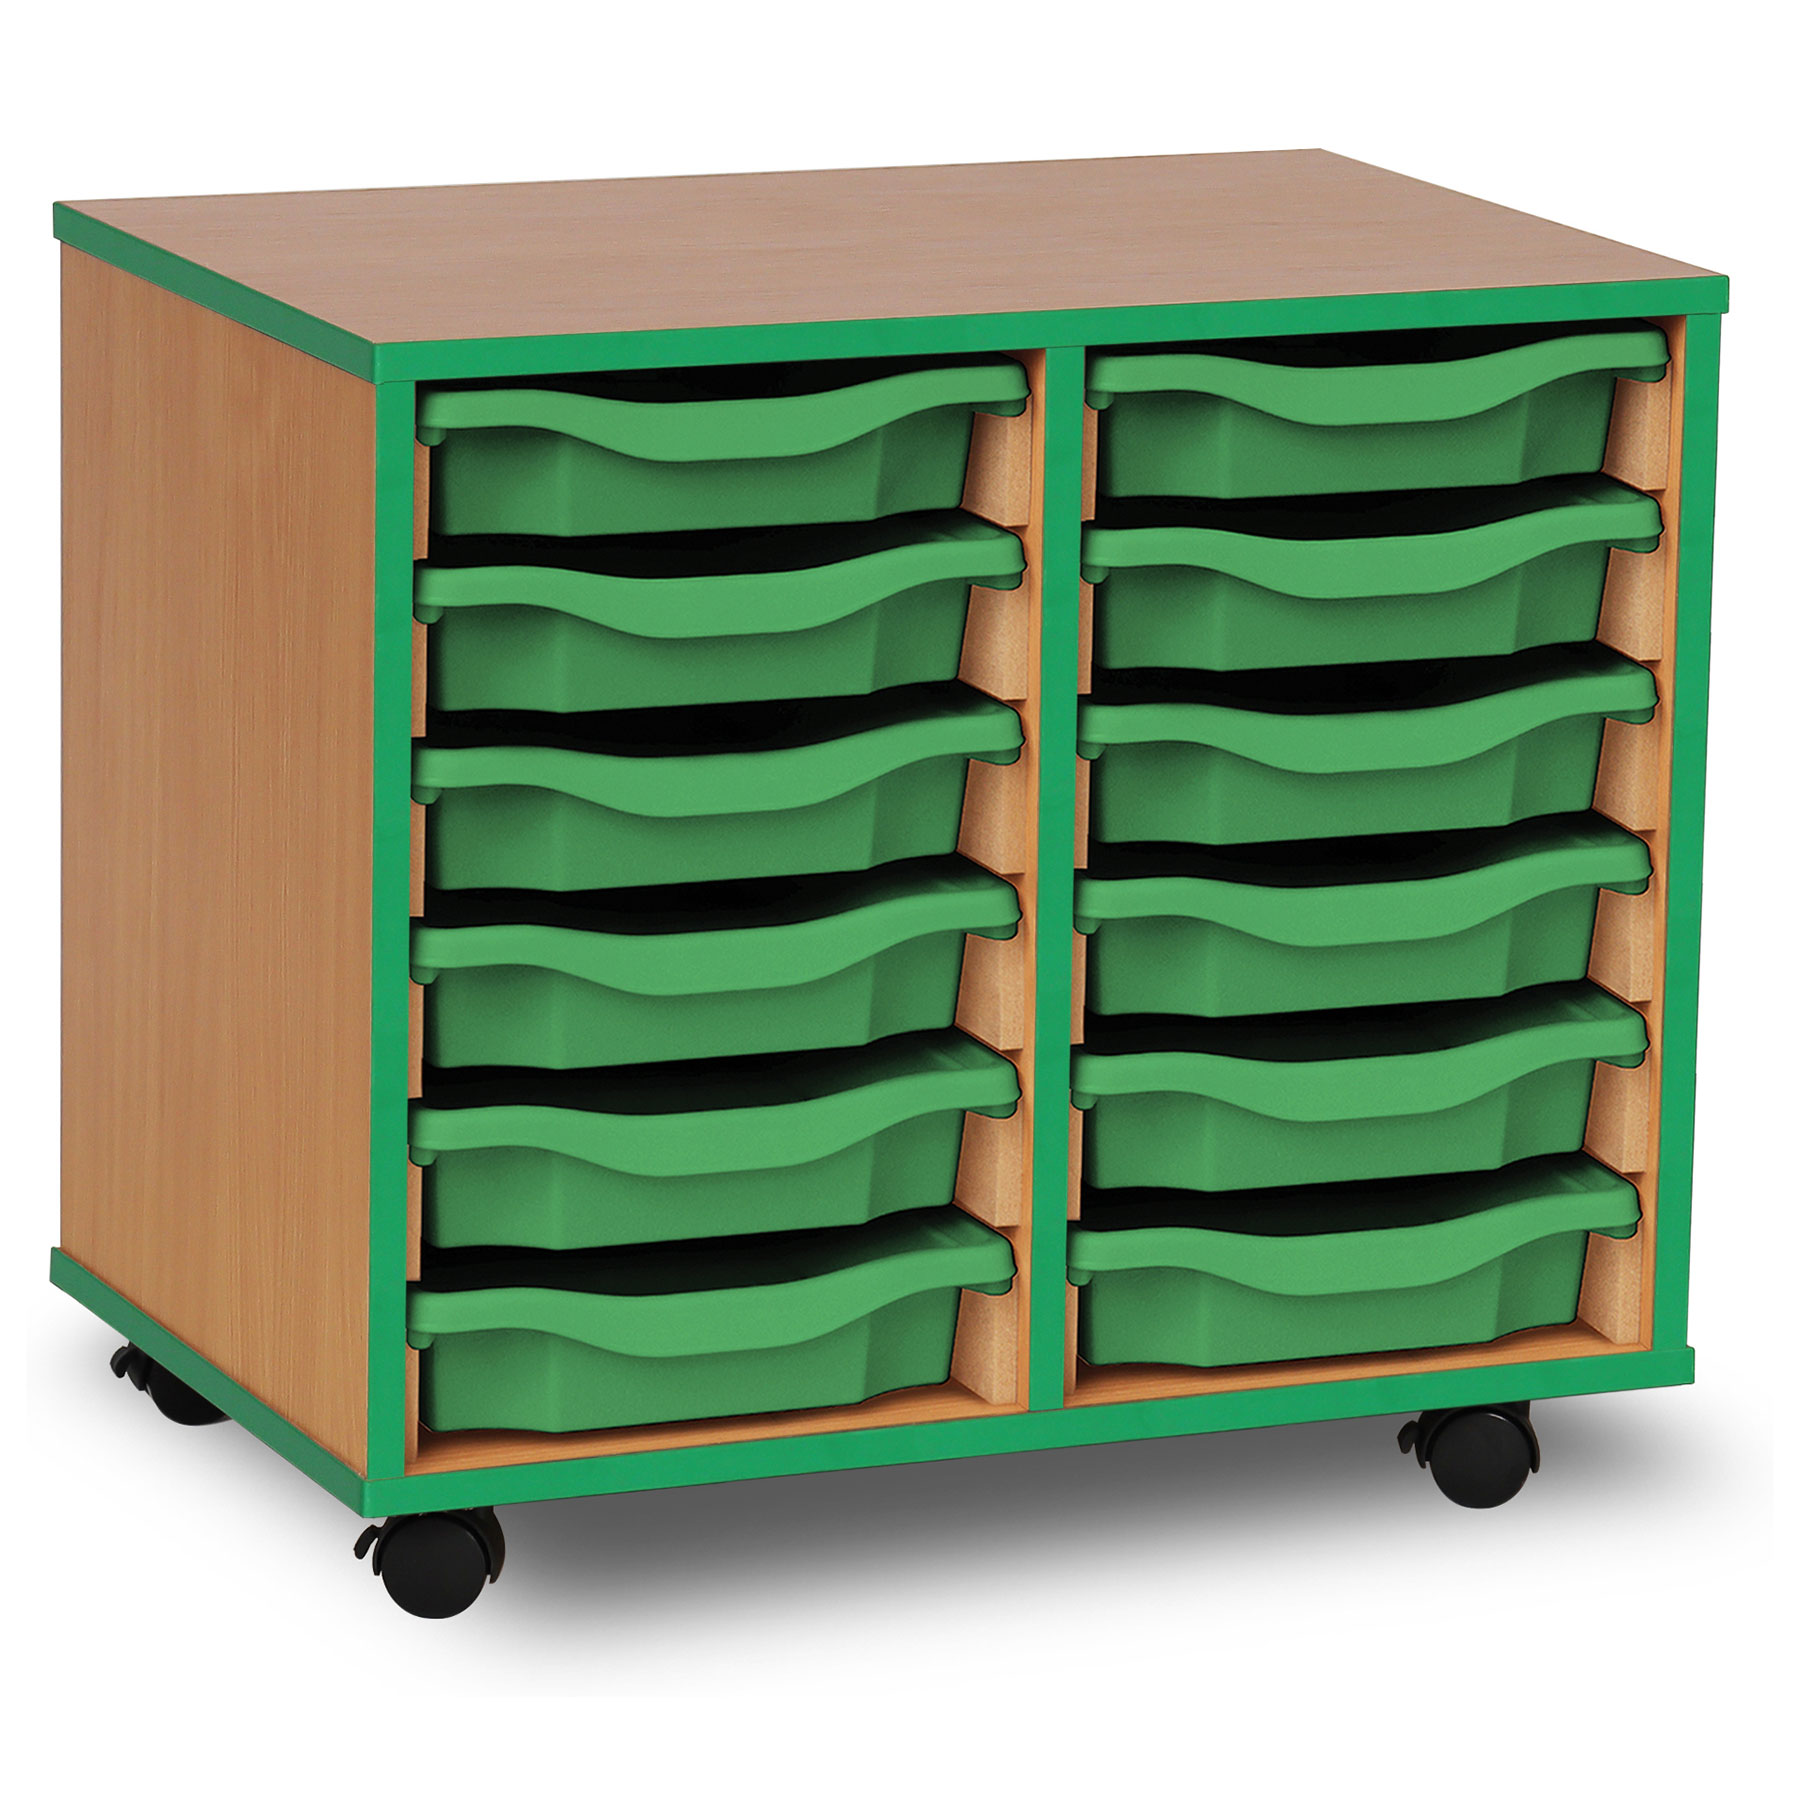 12 Single Tray Unit with Green Edging, Castors & Green Trays